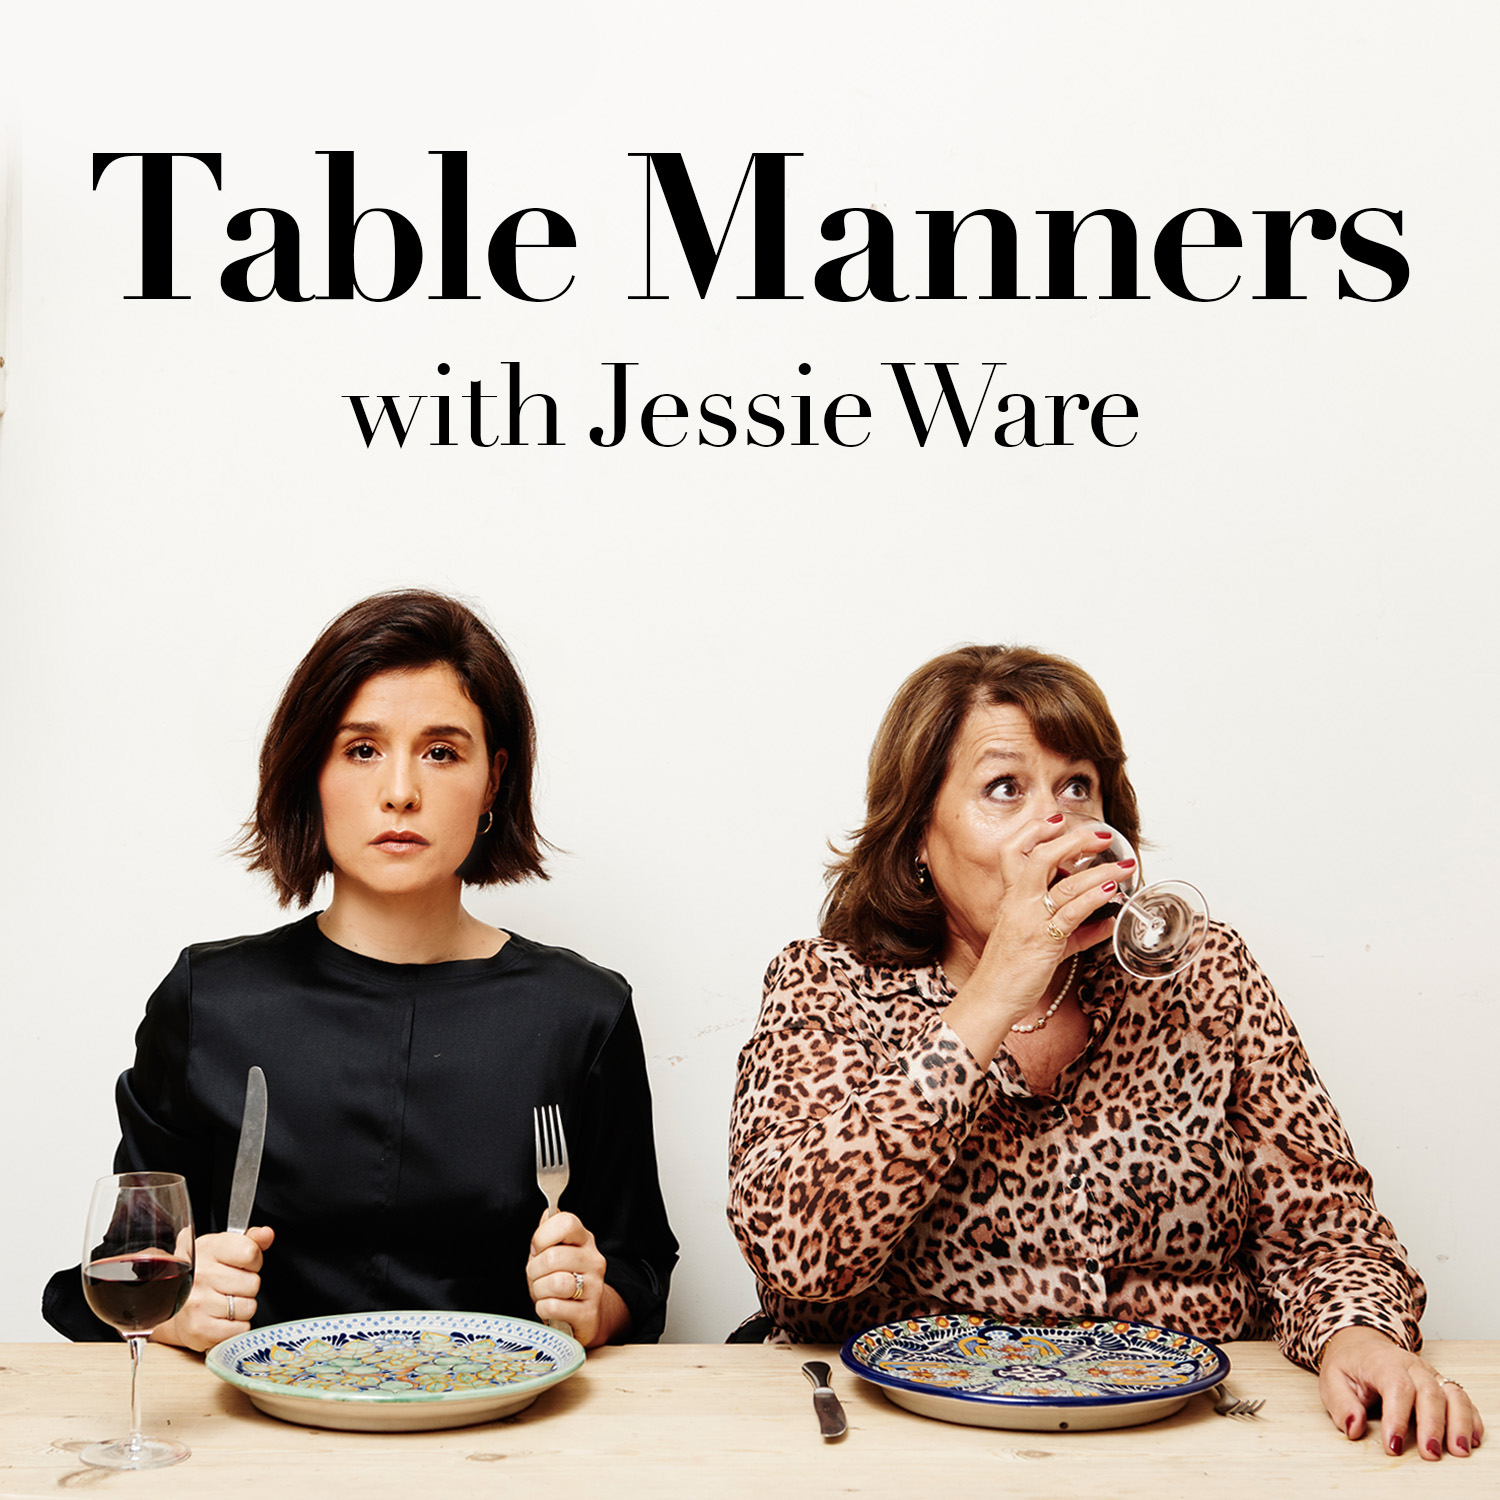 Table Manners With Jessie Lennie Ware